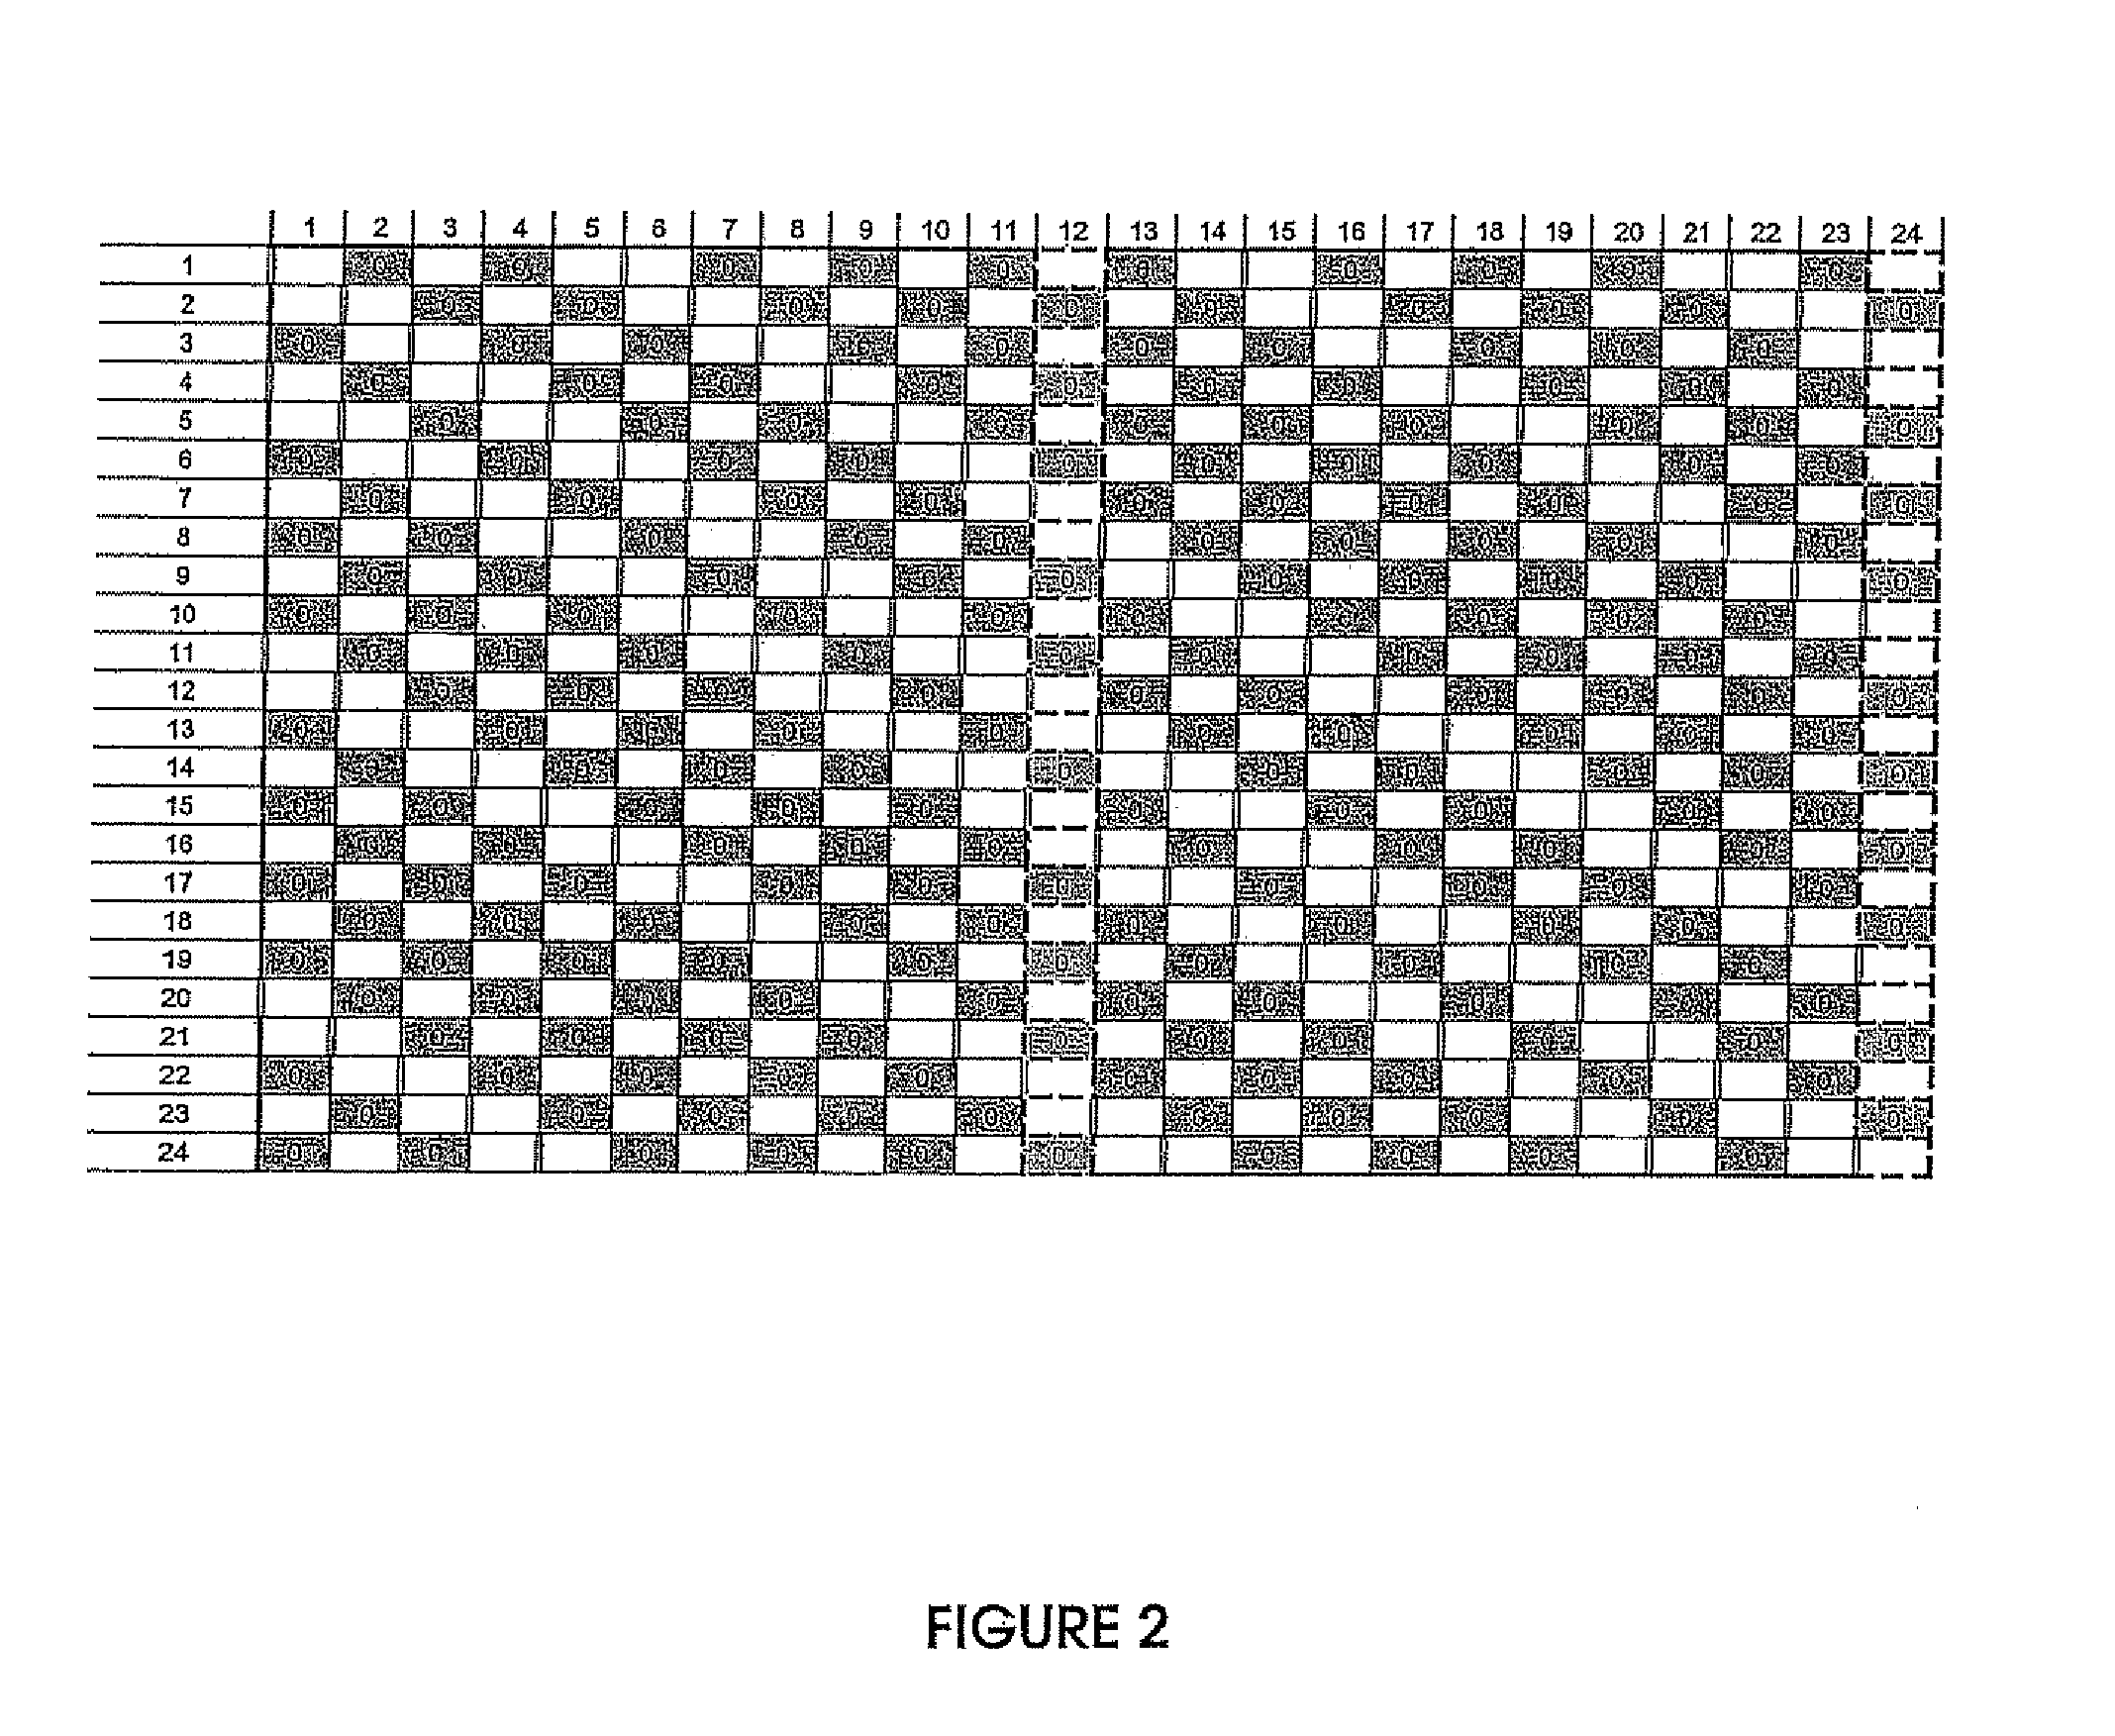 Simulated moving bed separation process and device